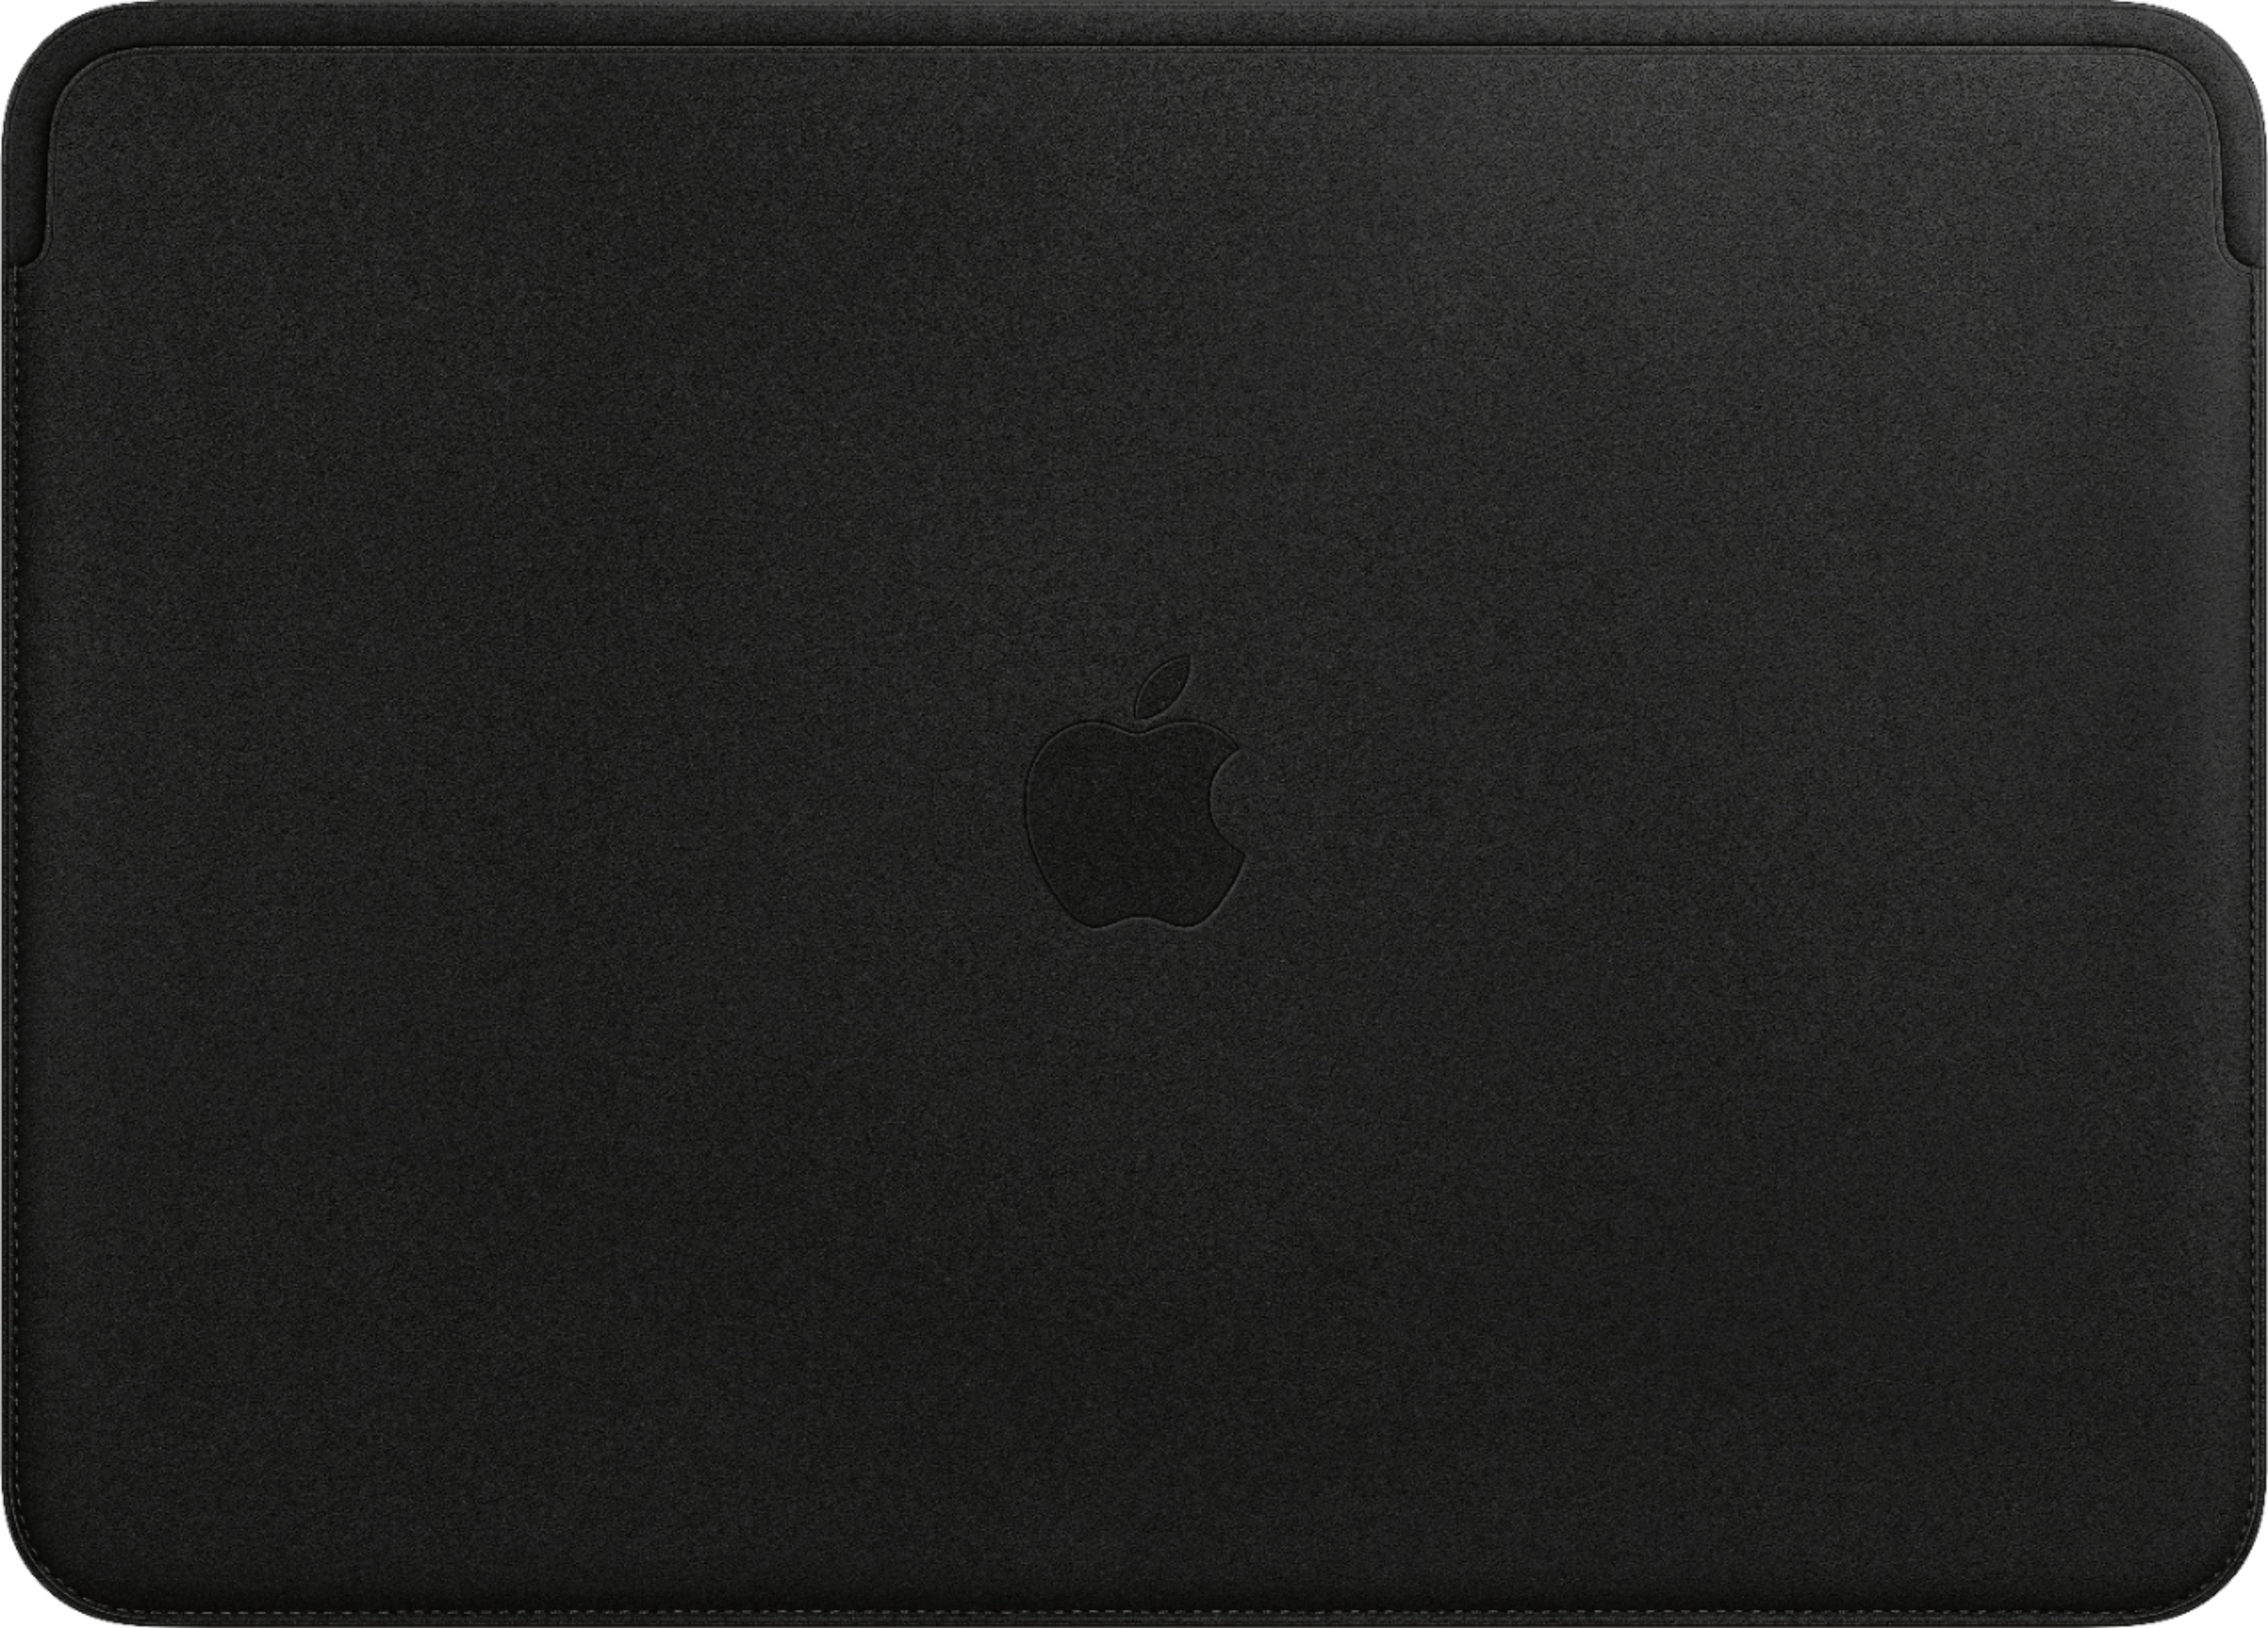 Review: Apple's Leather Sleeve for MacBook Pro is Pricey but Well